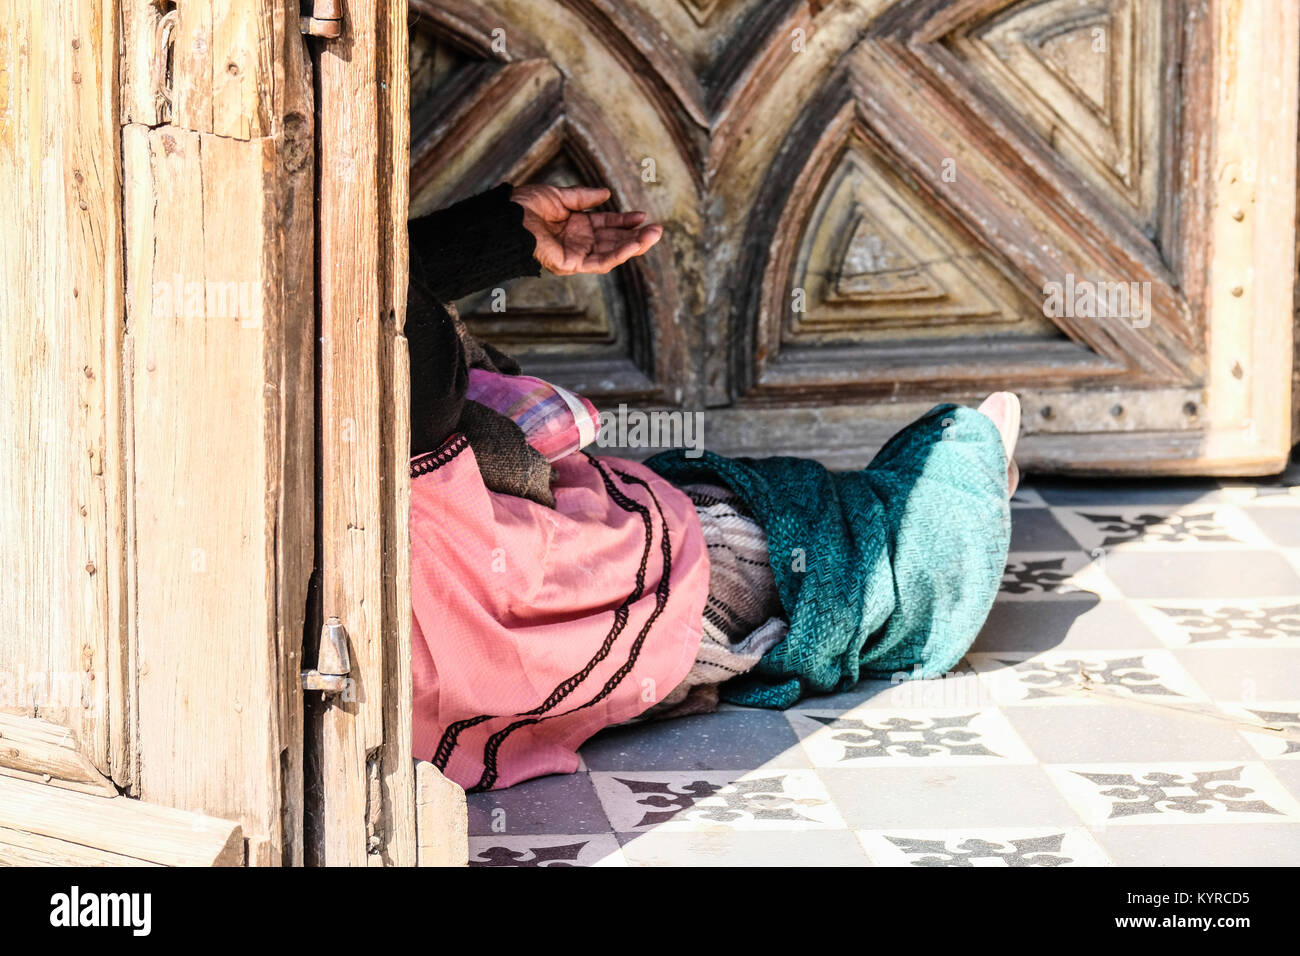 A female panhandler's hand begging for money at a church door in San Miguel de Allende,Mexico Stock Photo